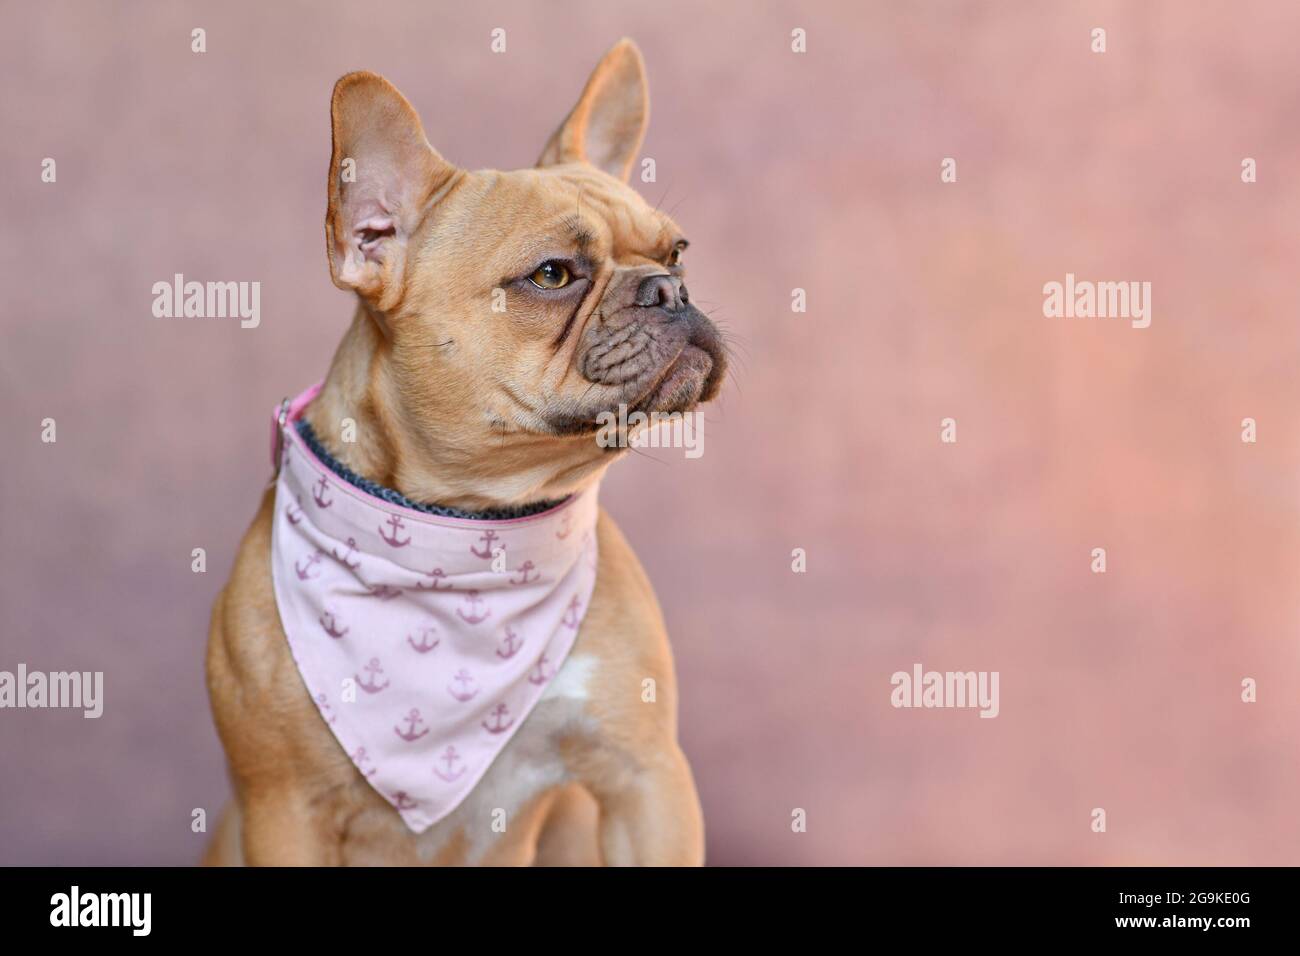 French Bulldog dog with neckerchief collar on side of pink background with copy space Stock Photo